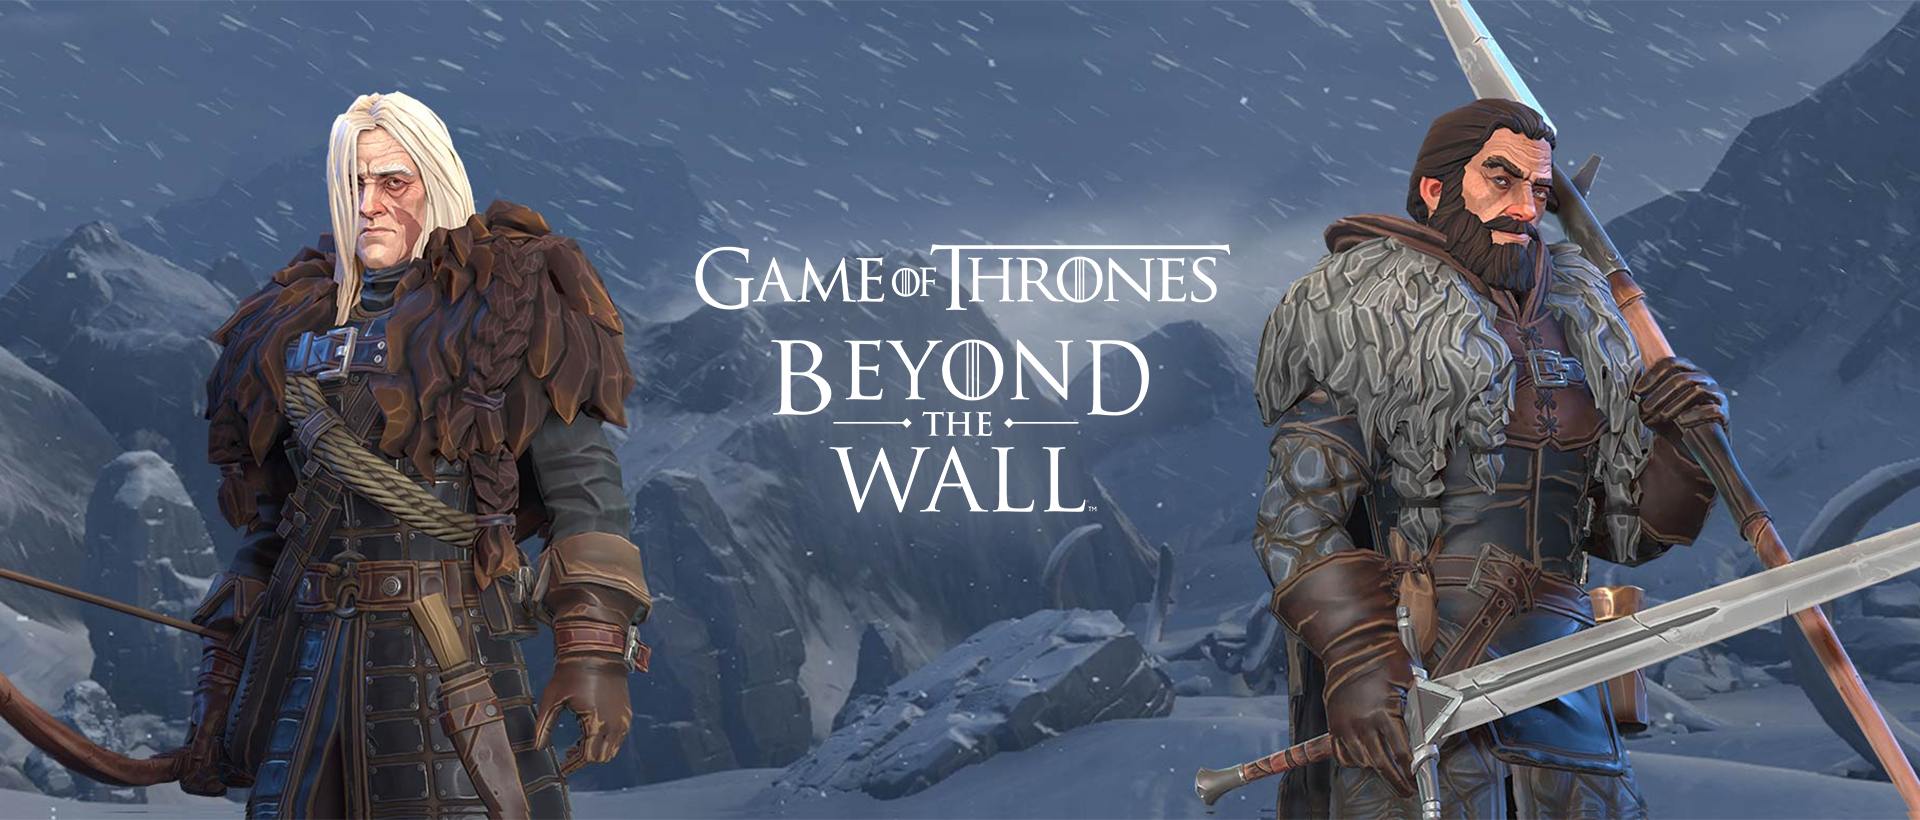 game of thrones beyond the wall interview